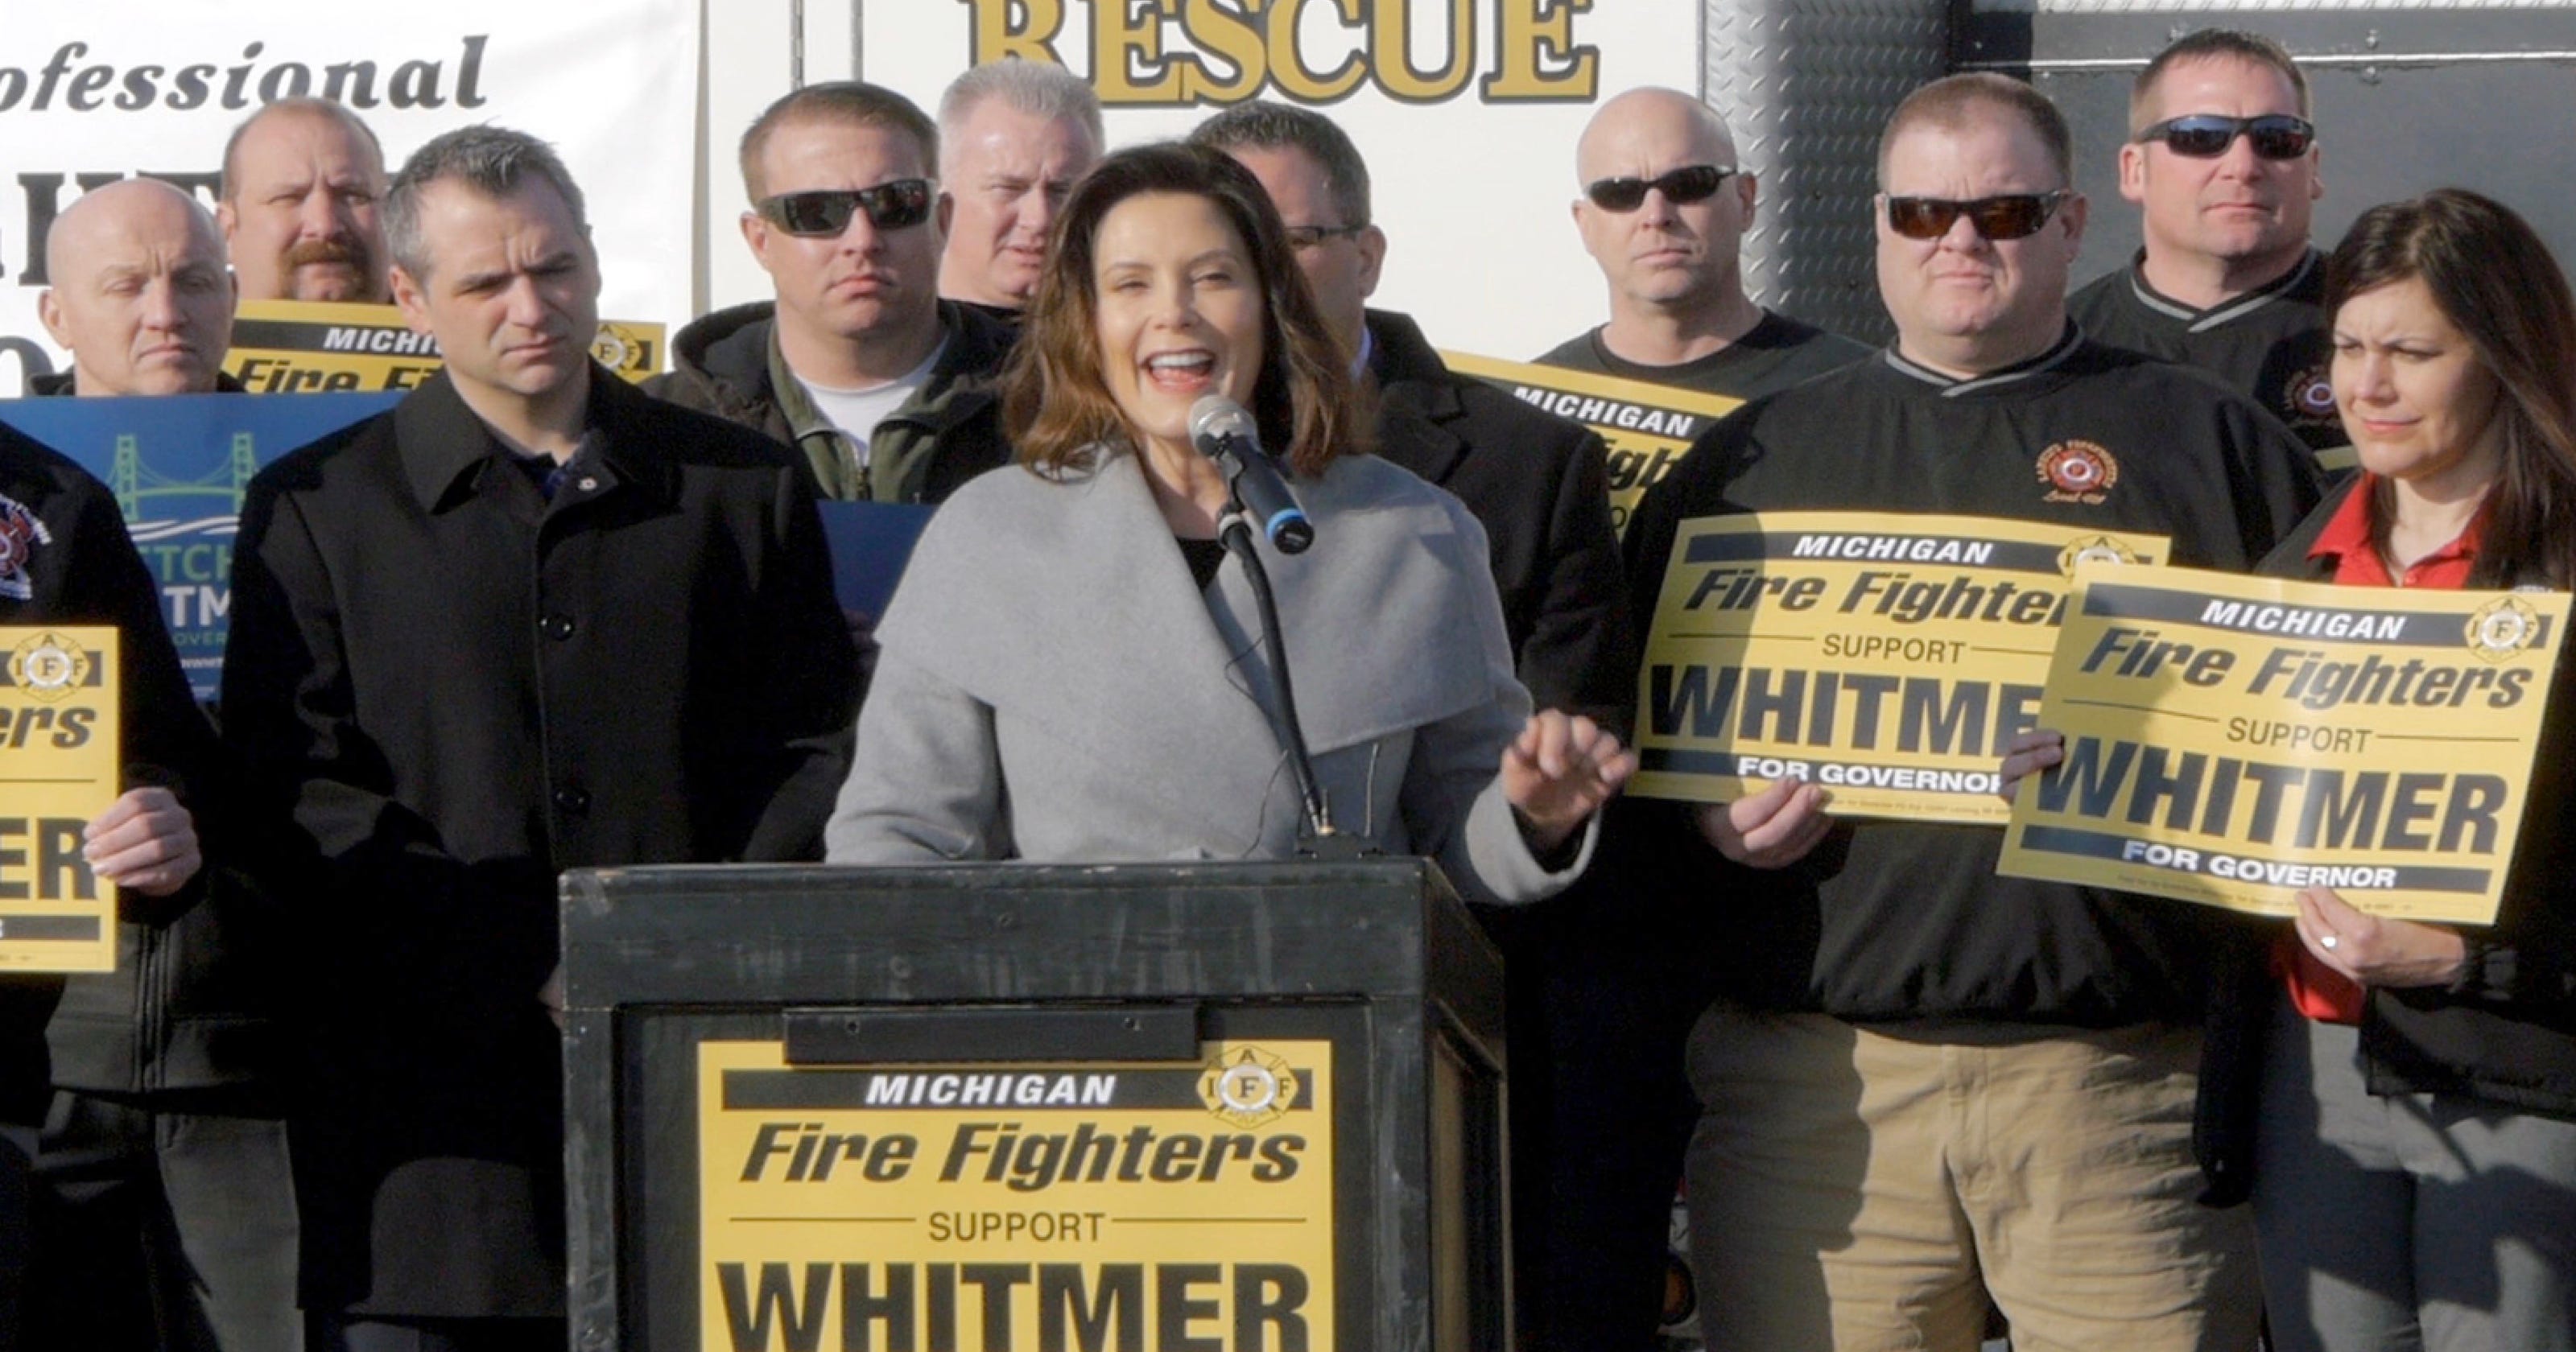 MSU, sex assaults weigh on Whitmer as she runs for governor3200 x 1680